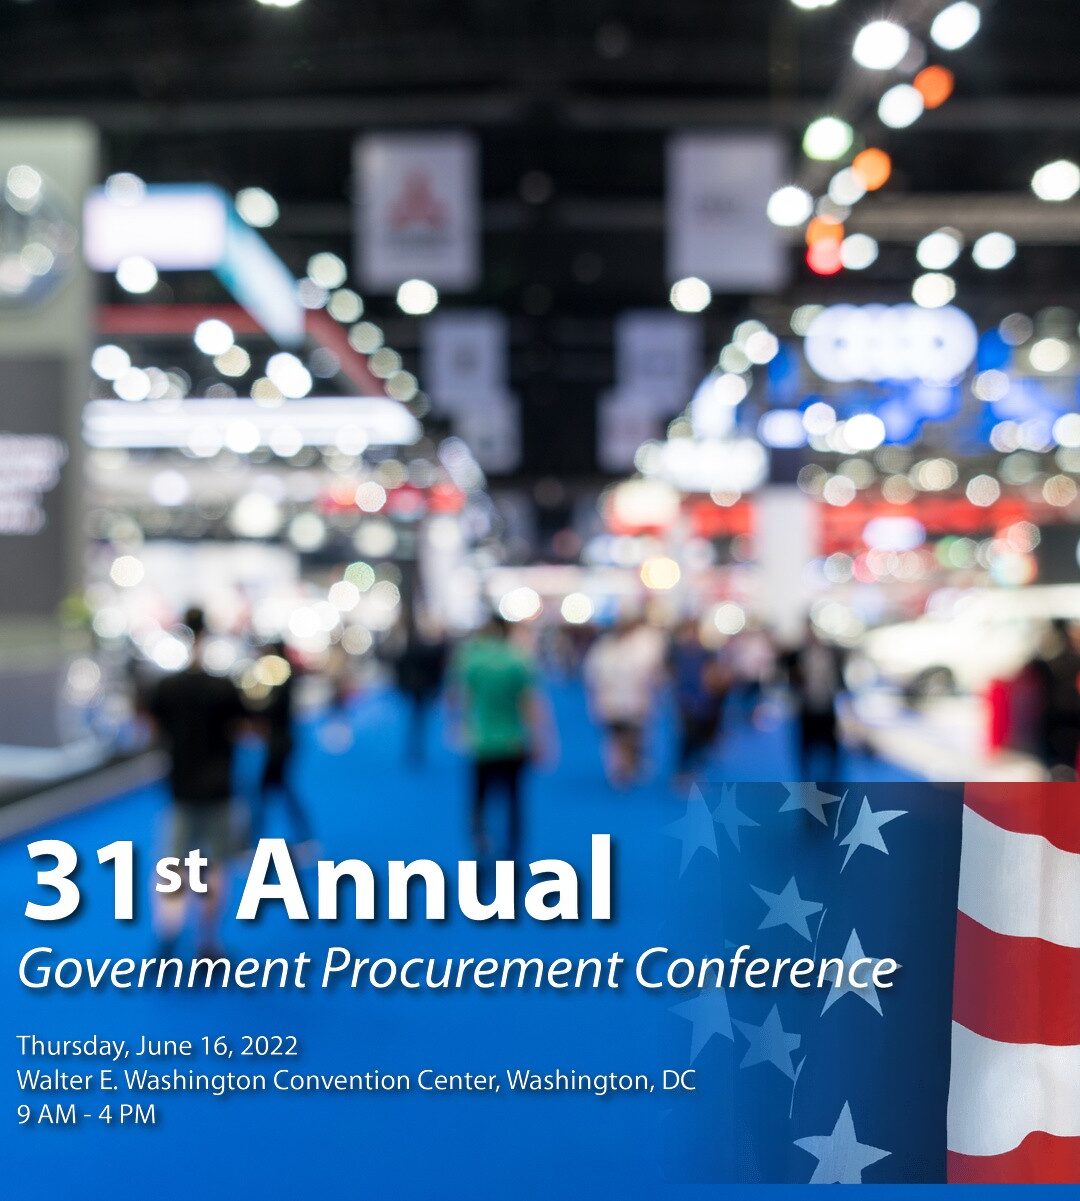 OST Global Solutions Exhibiting at the 31st Annual Government Procurement Conference June 16